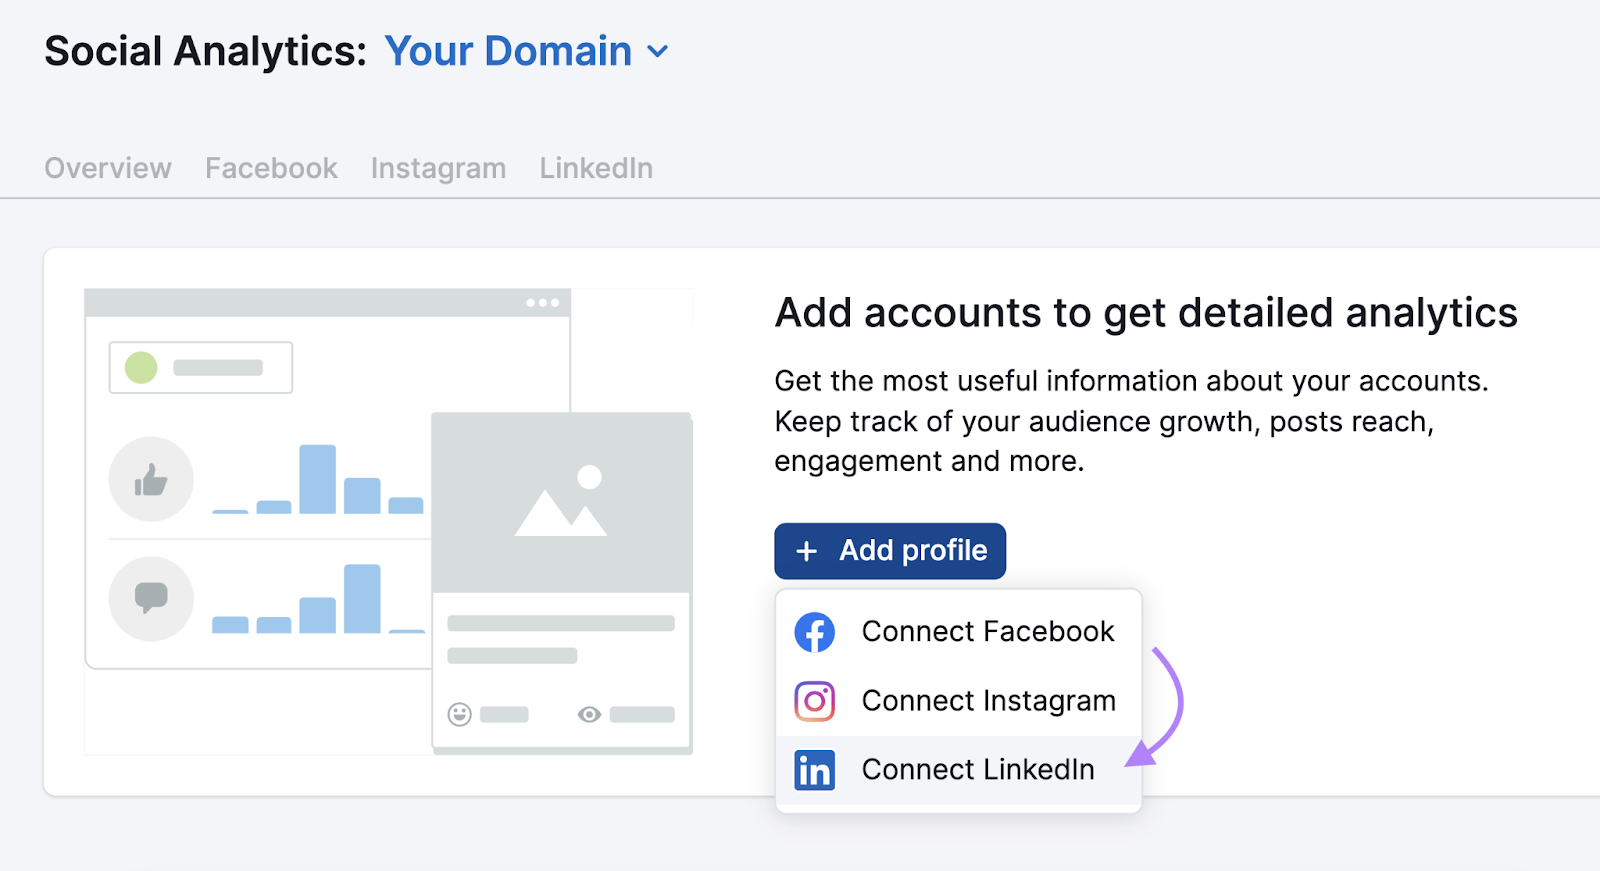 "Connect LinkedIn" button in Social Analytics tool